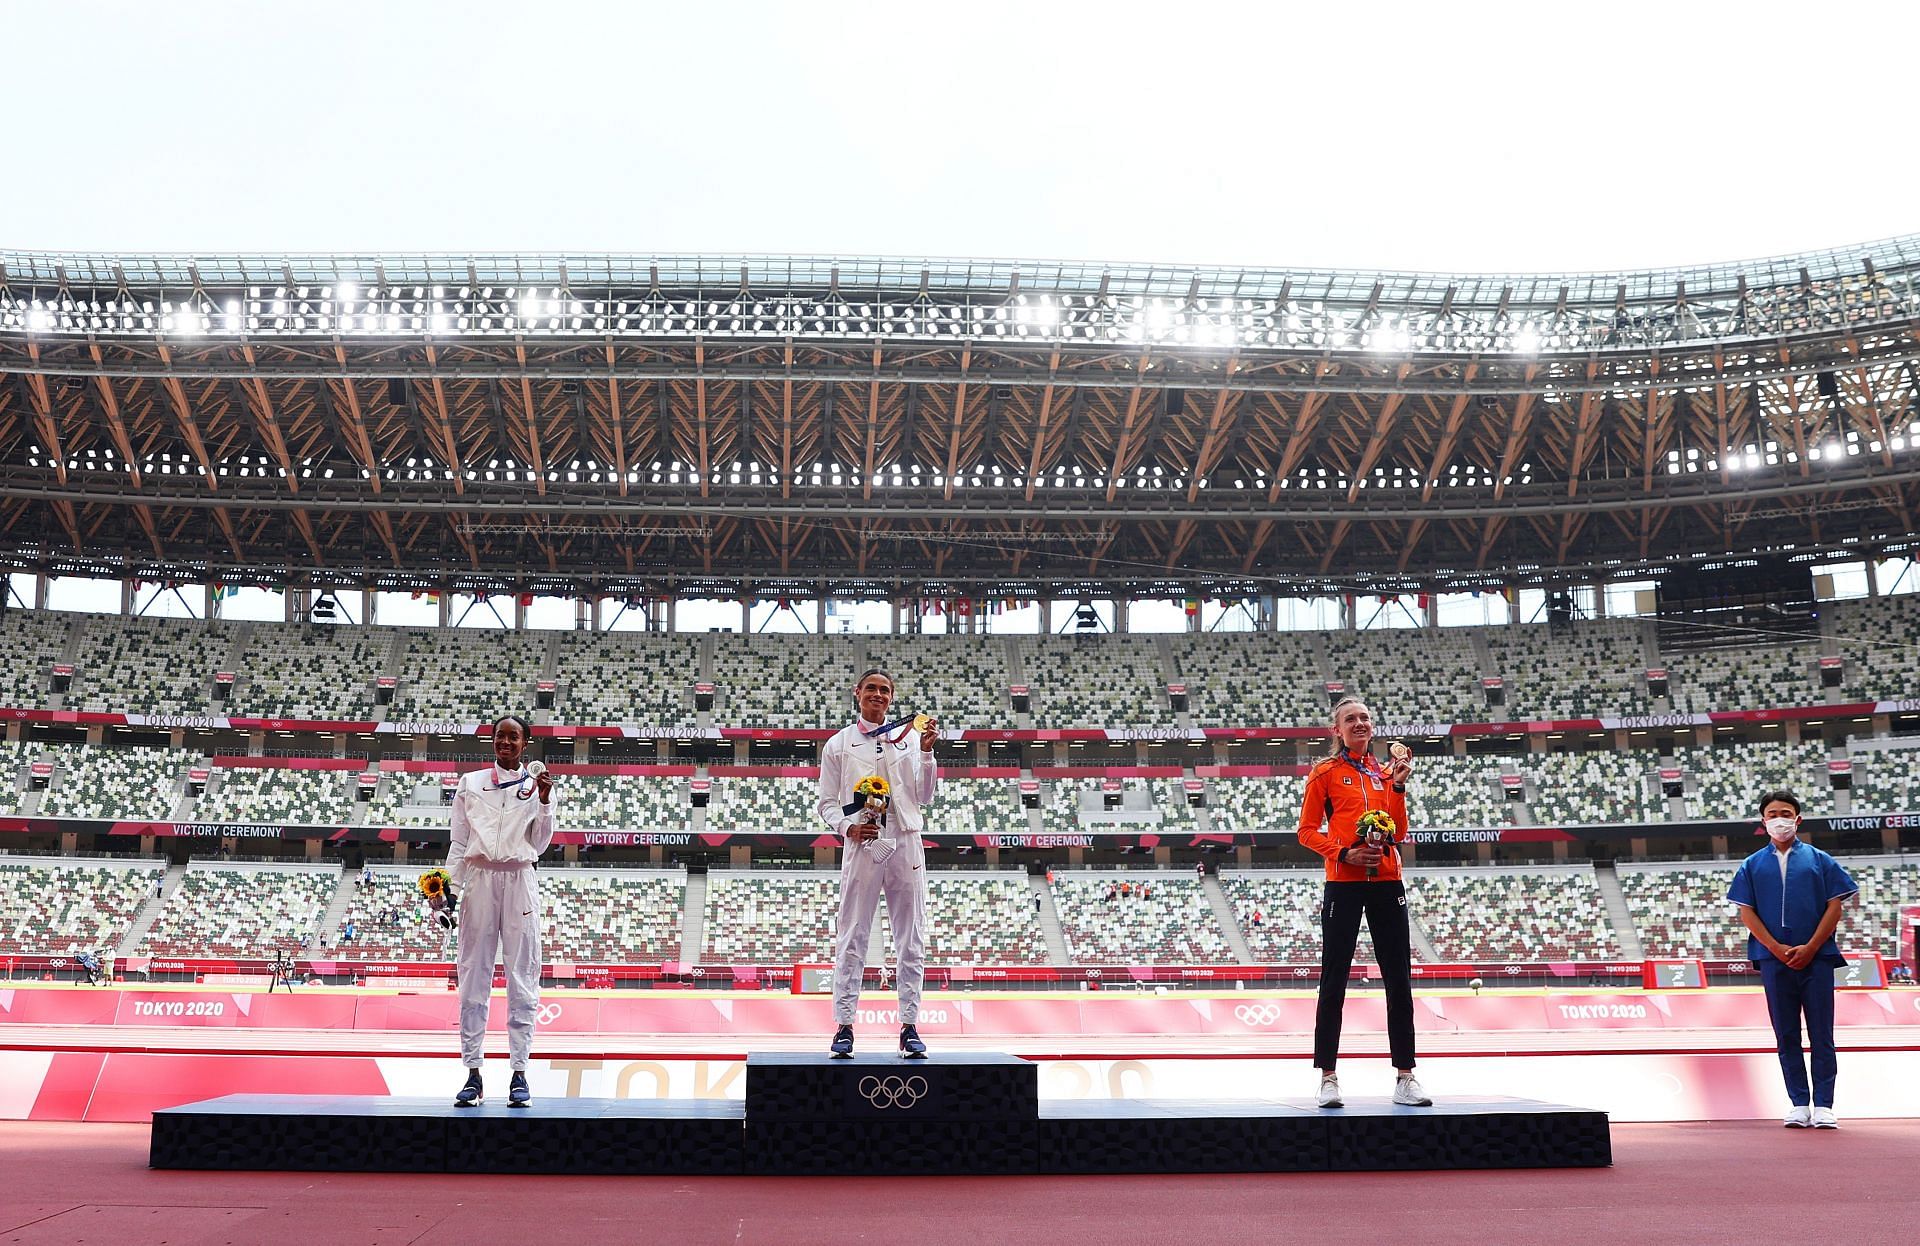 A medal ceremony in progress at the Tokyo Olympics (Image courtesy: Getty Images)